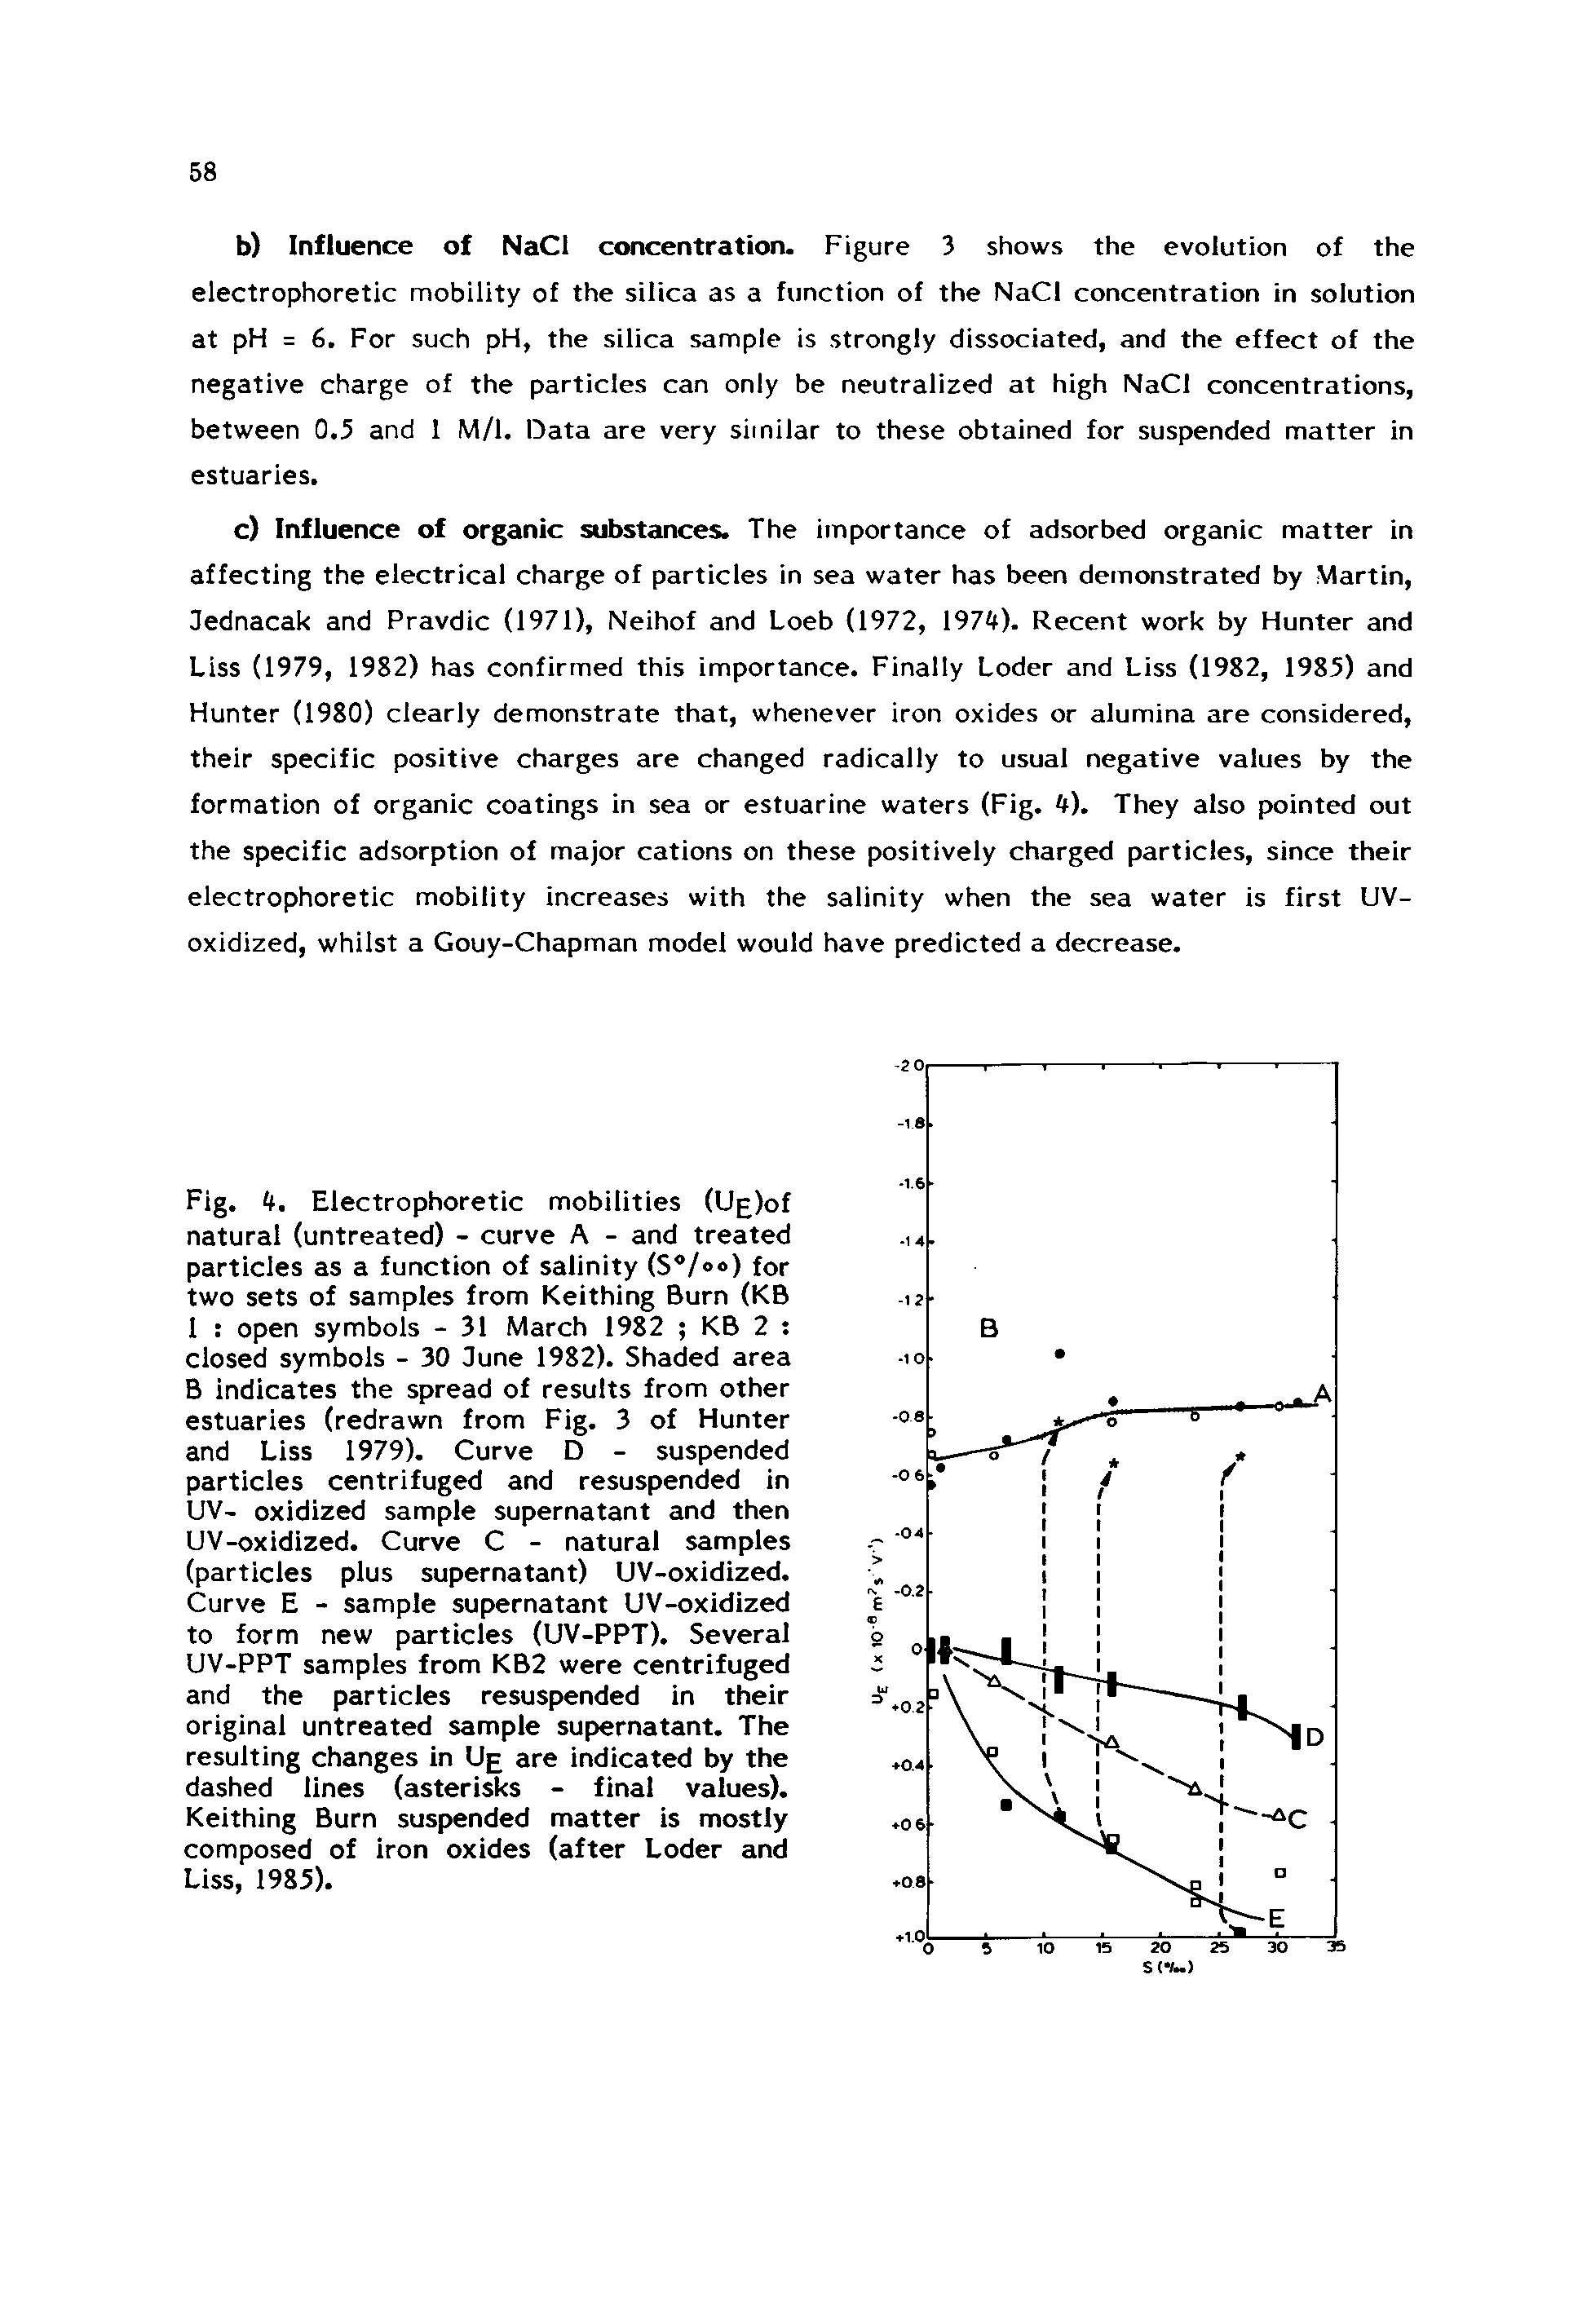 Fig. 4. Electrophoretic mobilities (Ug)of natural (untreated) - curve A - and treated particles as a function of salinity (S°/°<>) for two sets of samples from Keithing Burn (KB 1 open symbols - 31 March 1982 KB 2 closed symbols - 30 dune 1982). Shaded area B indicates the spread of results from other estuaries (redrawn from Fig. 3 of Hunter and Liss 1979). Curve D - suspended particles centrifuged and resuspended in UV- oxidized sample supernatant and then UV-oxidized. Curve C - natural samples (particles plus supernatant) UV-oxidized. Curve E - sample supernatant UV-oxidized to form new particles (UV-PPT). Several UV-PPT samples from KB2 were centrifuged and the particles resuspended in their original untreated sample supernatant. The resulting changes in Ug are indicated by the dashed lines (asterisks - final values). Keithing Burn suspended matter is mostly composed of iron oxides (after Loder and Liss, 1985).